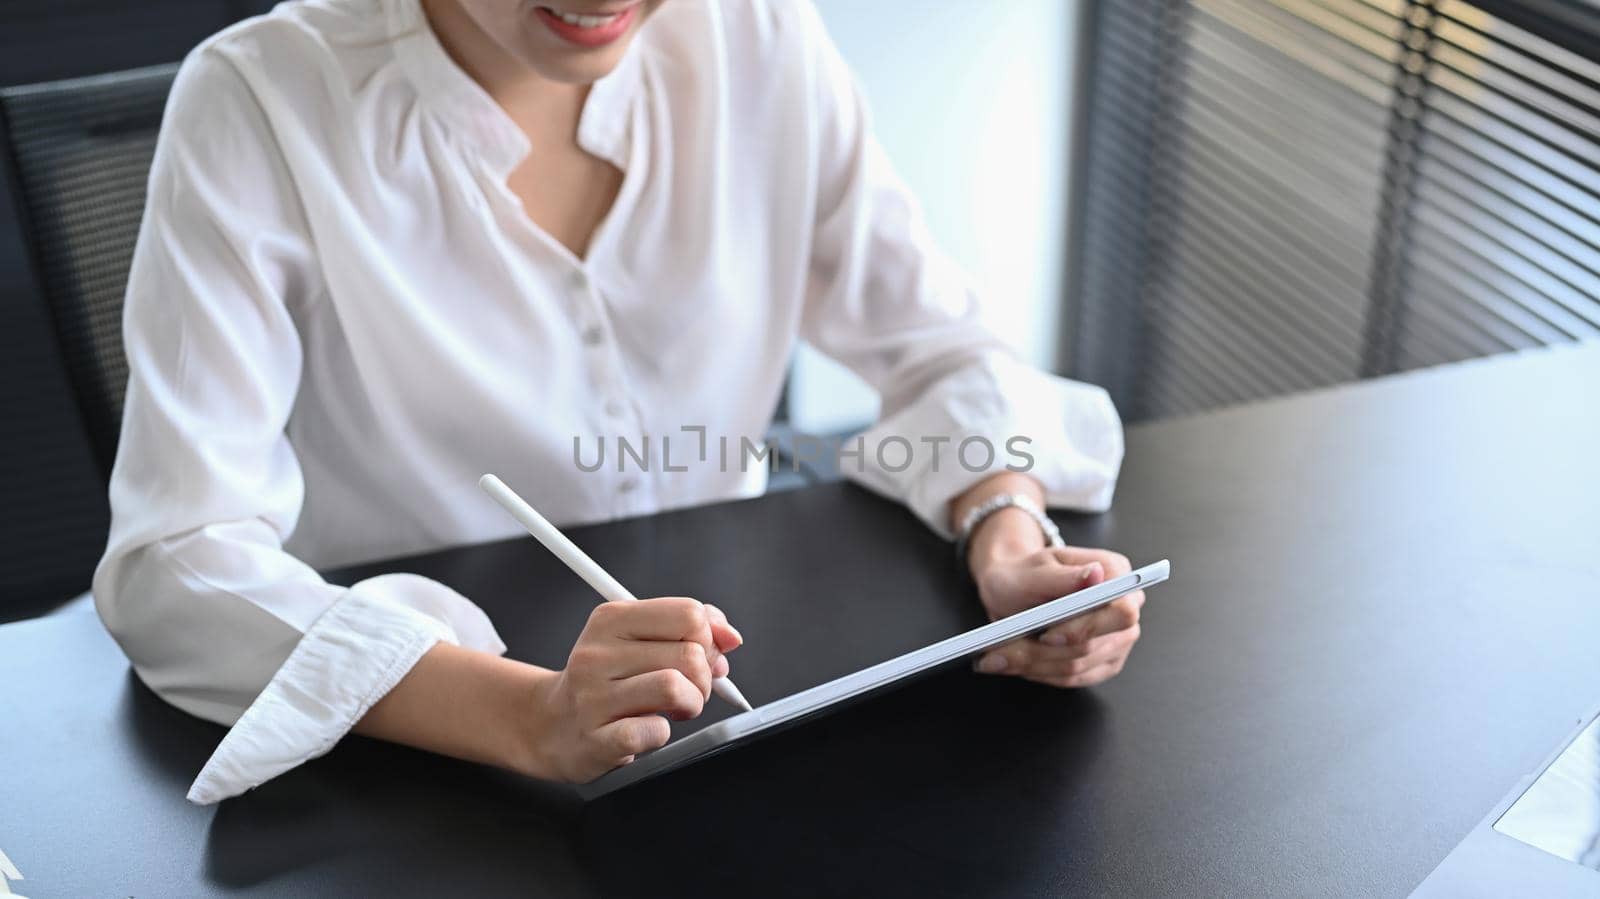 Professional businesswoman using digital tablet and preparing annual financial report at office desk by prathanchorruangsak